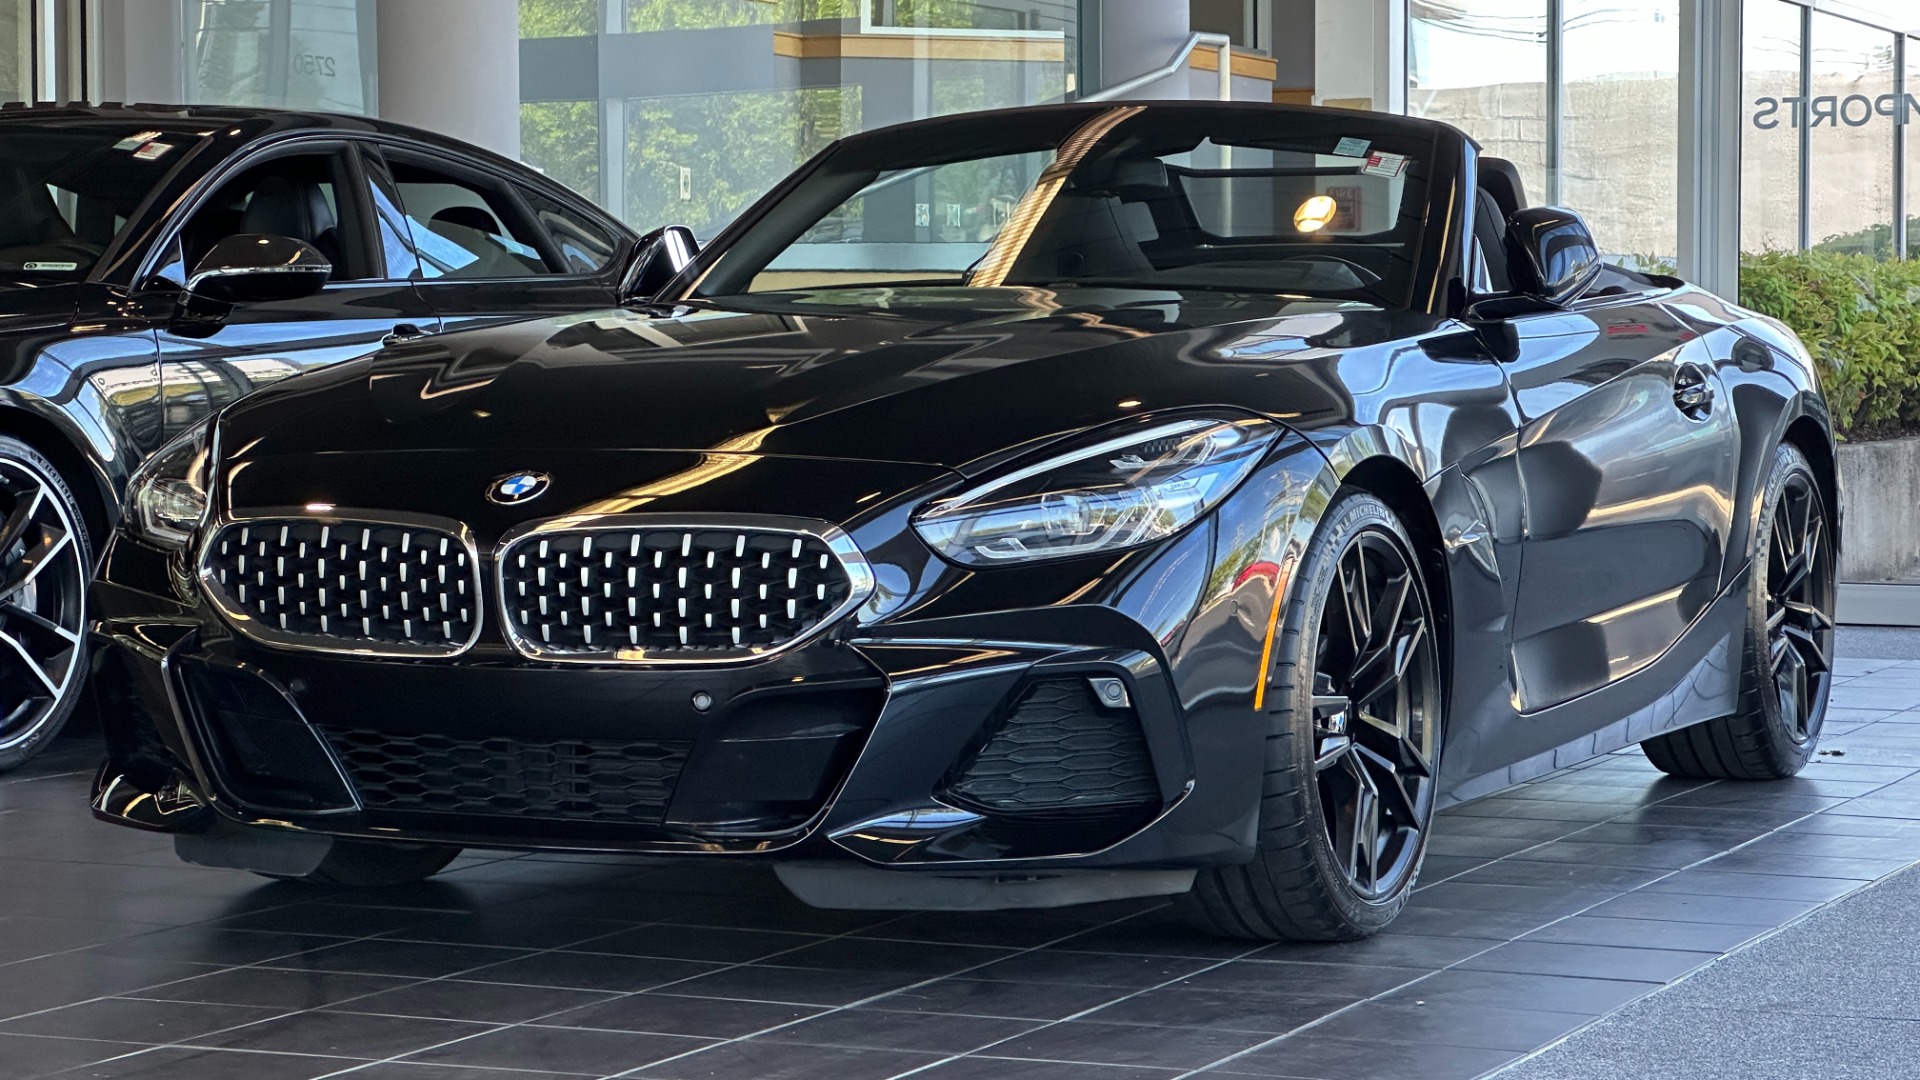 2020 Used BMW Z4 sDrive30i Roadster at  Serving